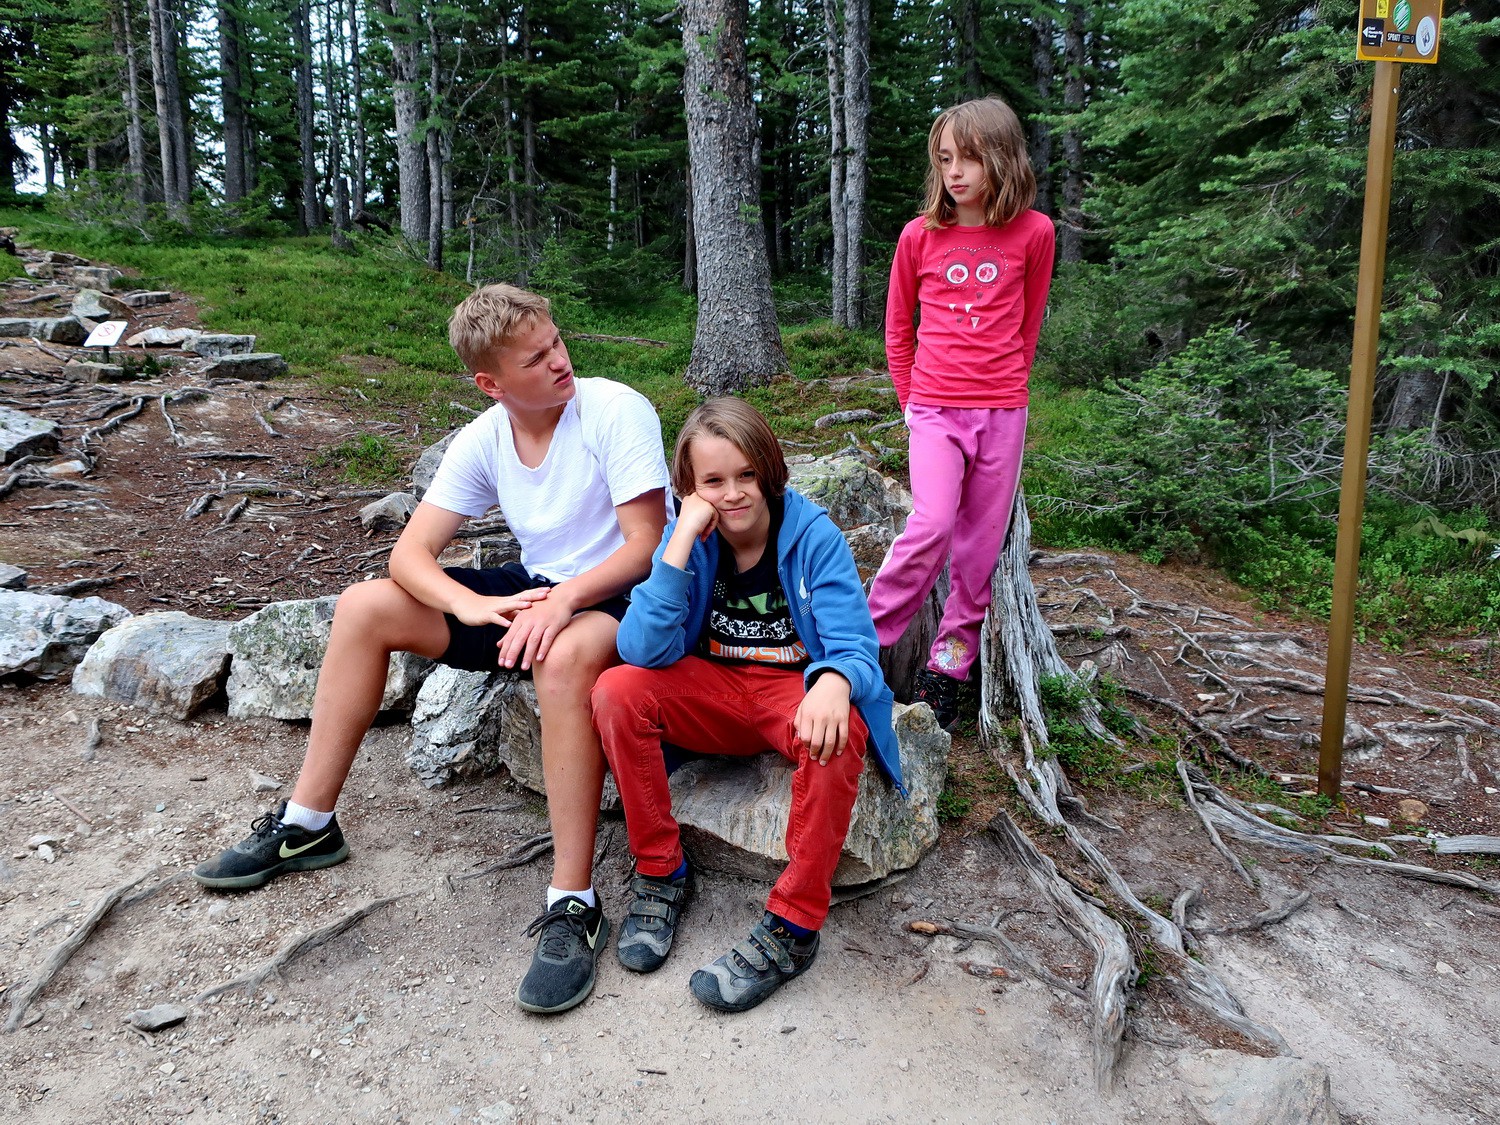 Little bit tired kids, after hiking approximately 10 kilometers from 1740 to 2270 meters sea-level